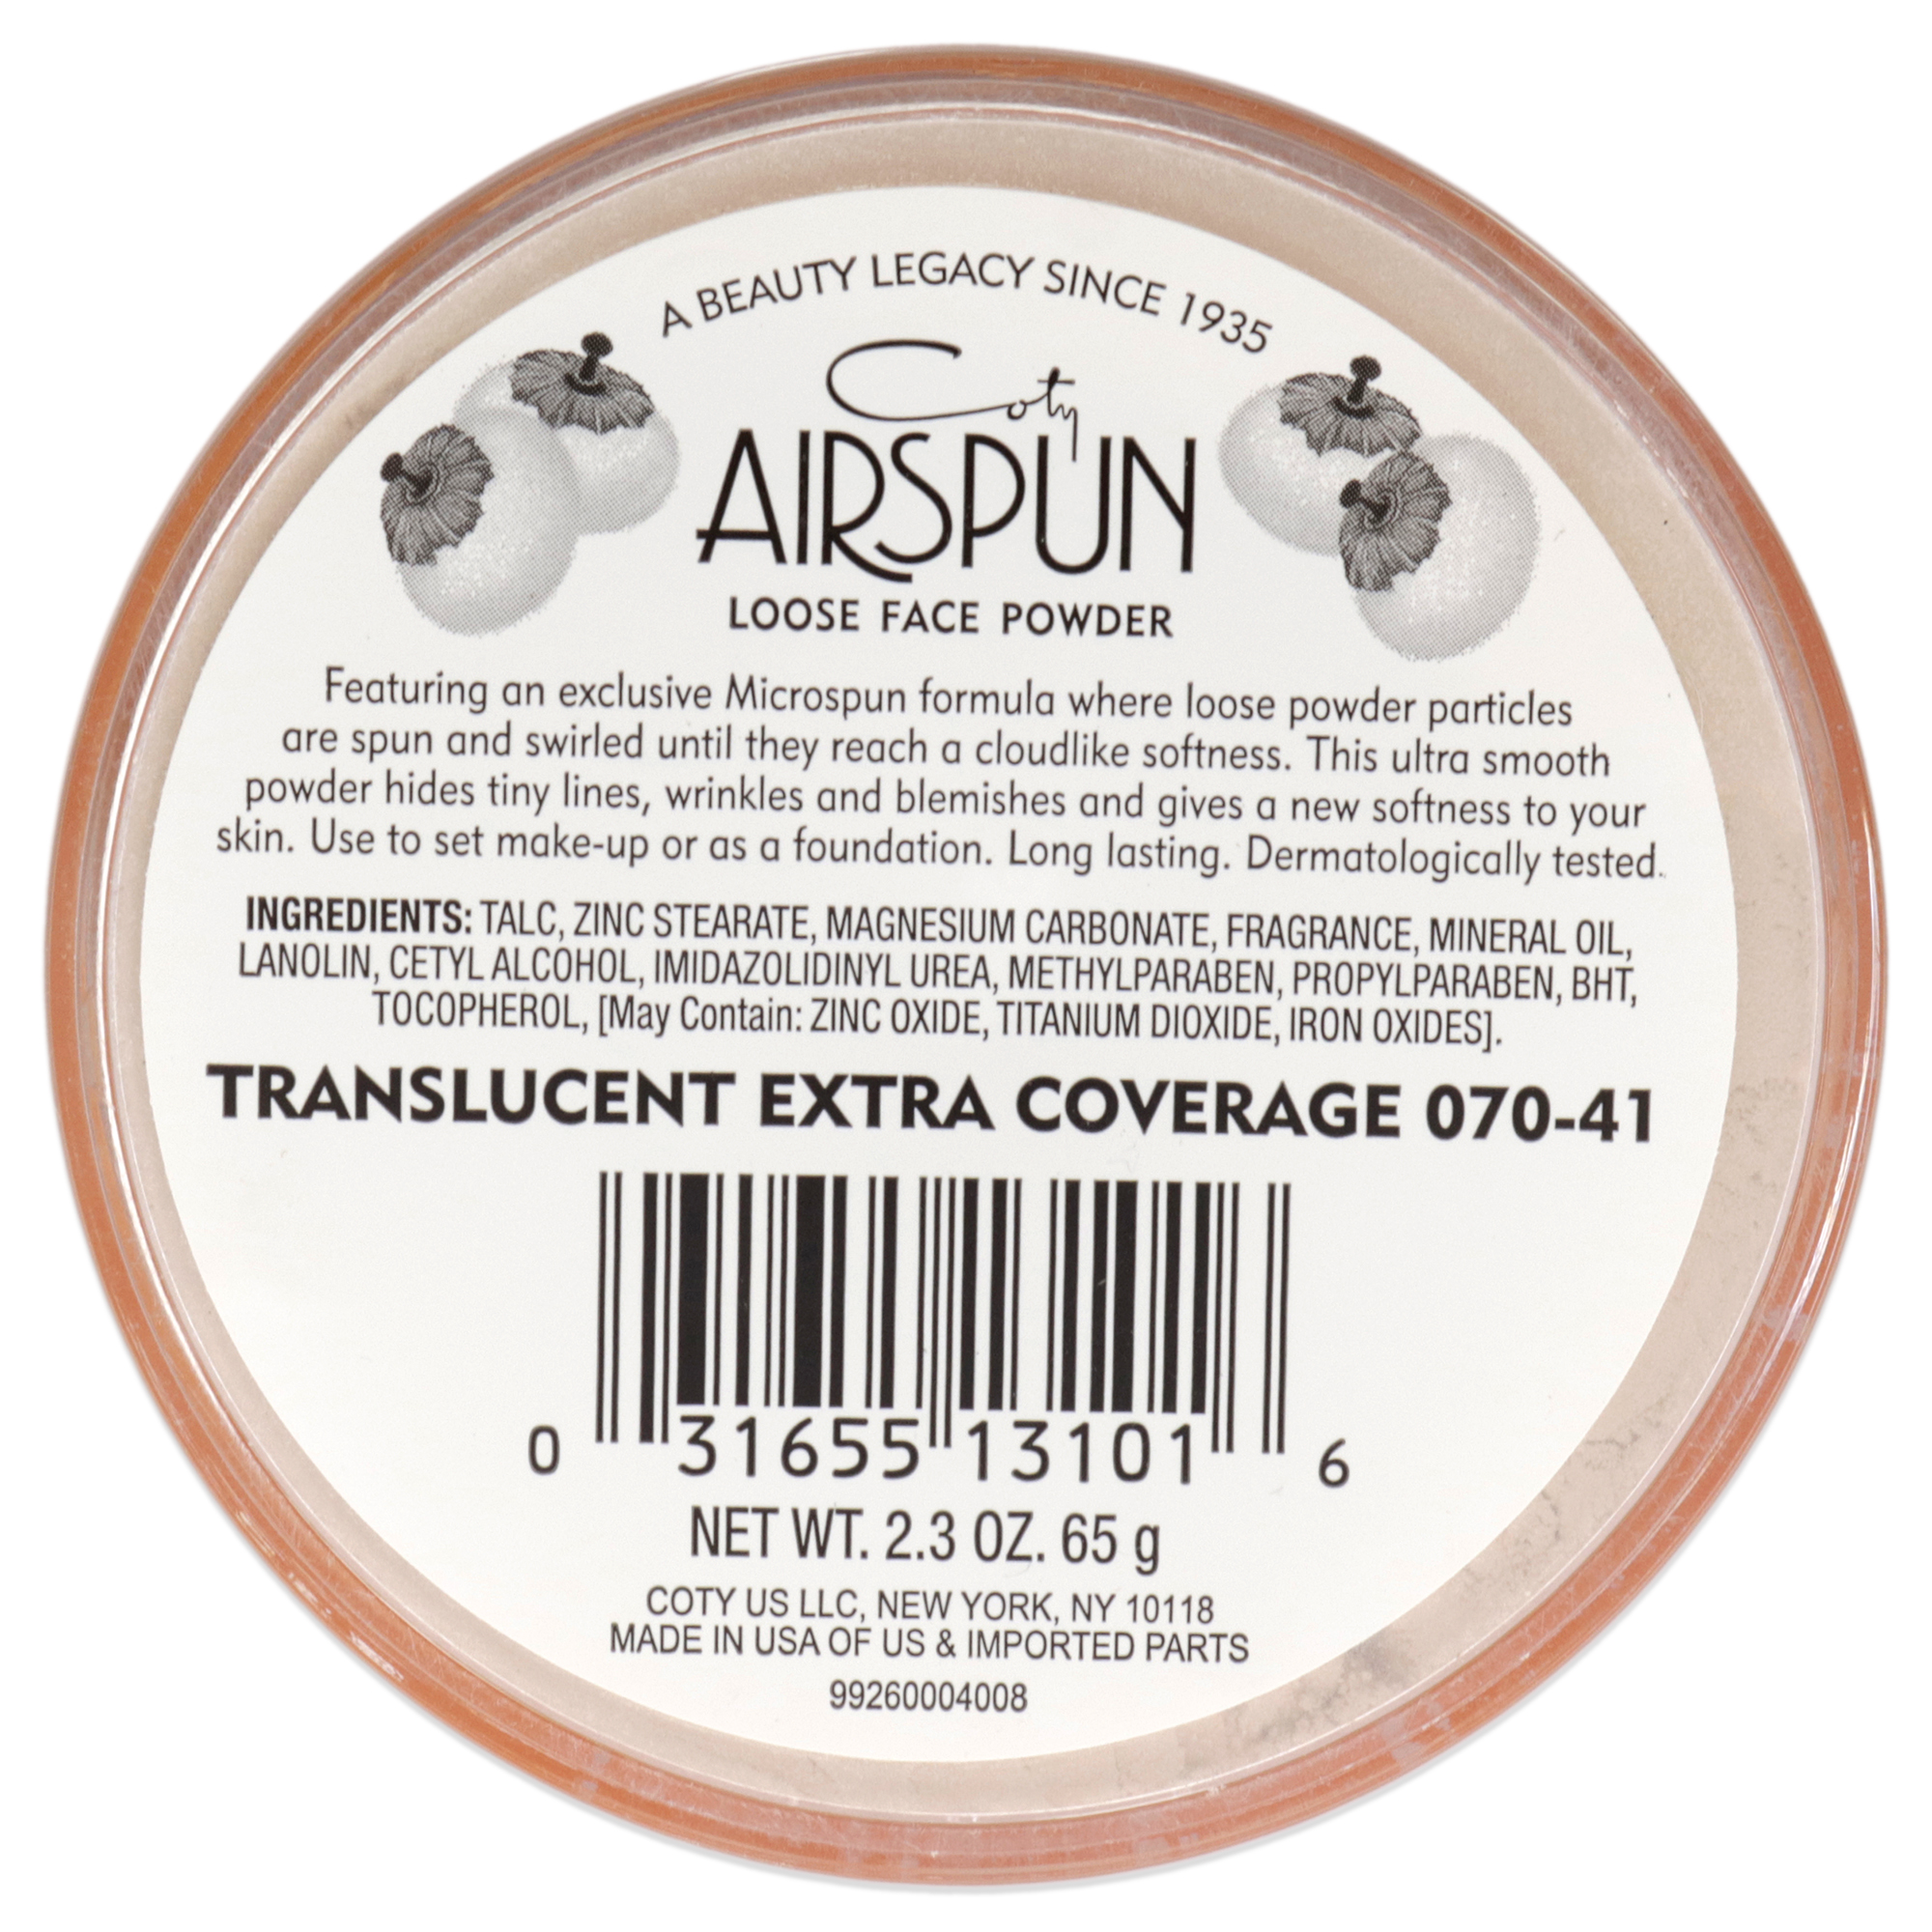 Coty Airspun Loose Face Powder, 041 Translucent Extra Coverage, 2.3 oz - image 3 of 3